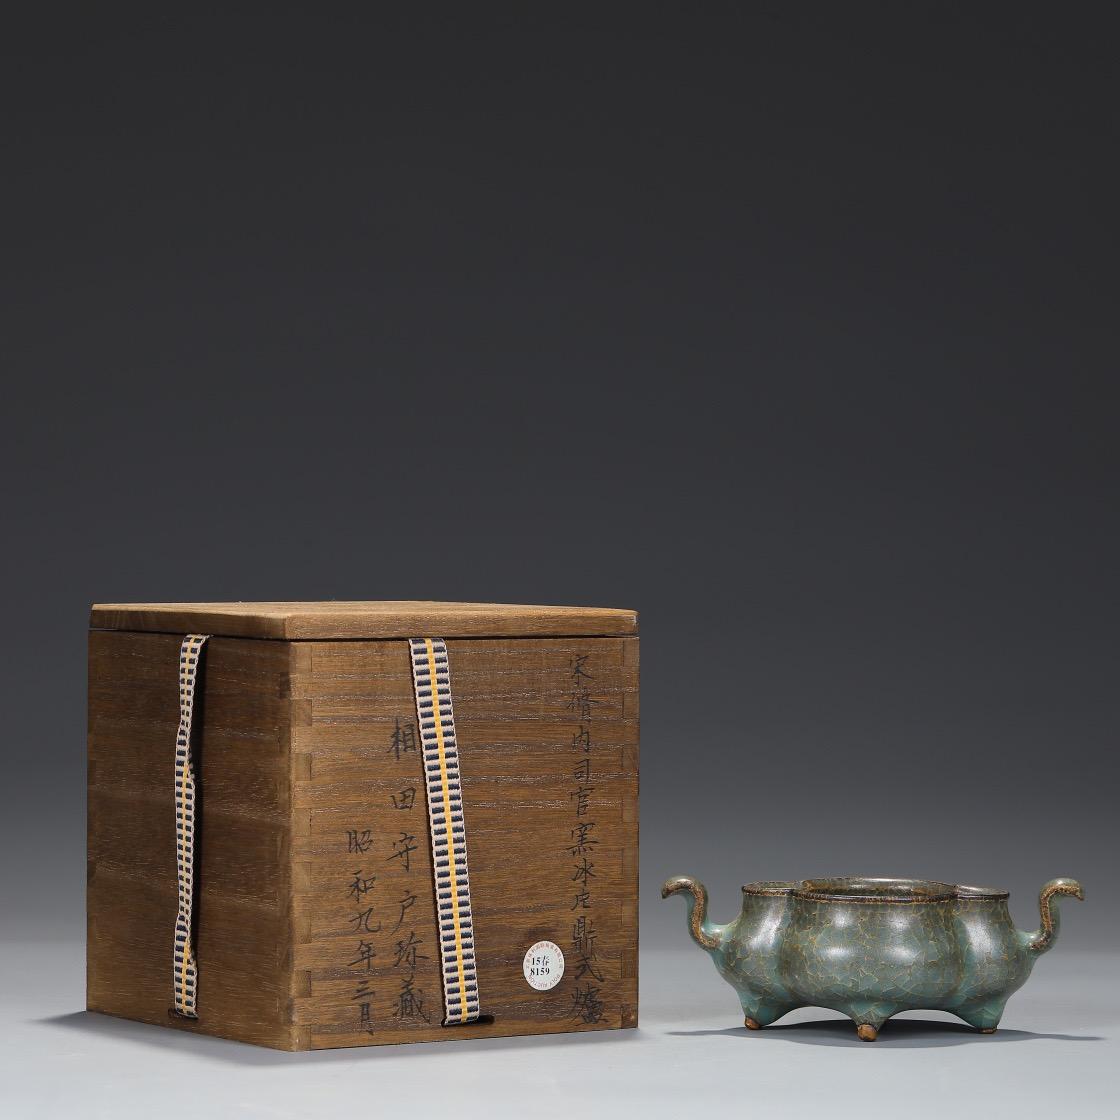 This old collection of Southern Song Dynasty Xiu Nei Si Official Kiln Ice Cracking Glaze Pattern Burner is very special with high craftsmanship. 

Kilns were essential for firing ceramics, and each kiln often developed its unique style and